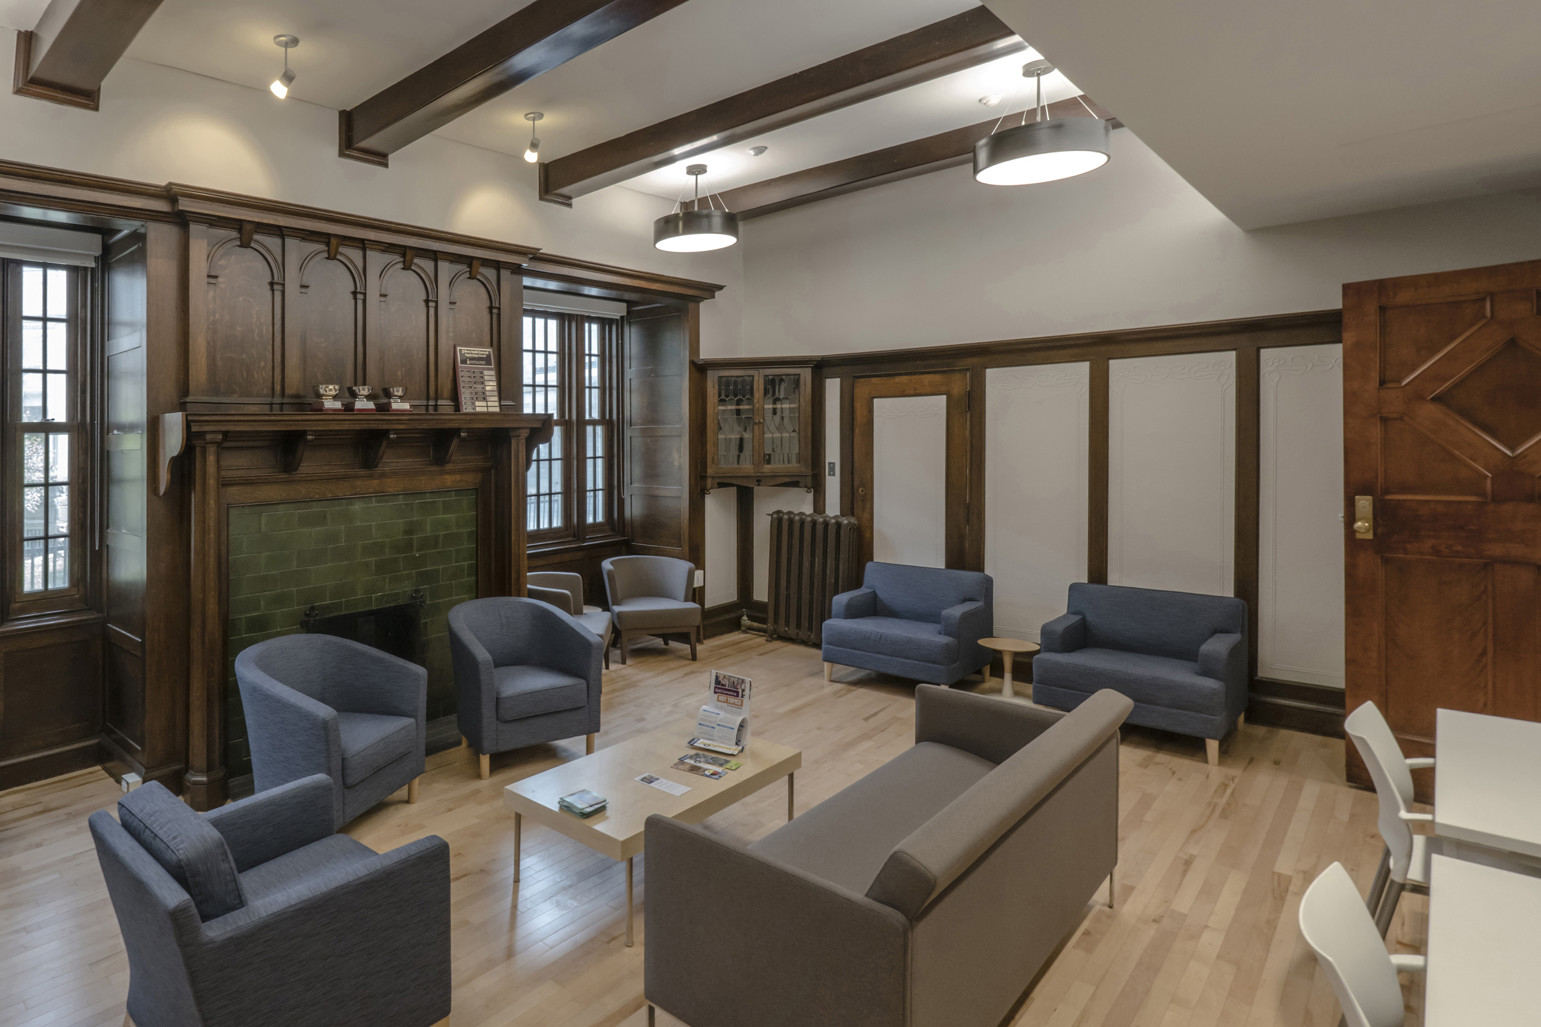 Student lounge with blue armchairs, grey couch, green brick fireplace, wood wall detailing, exposed wood beam ceiling, and large windows